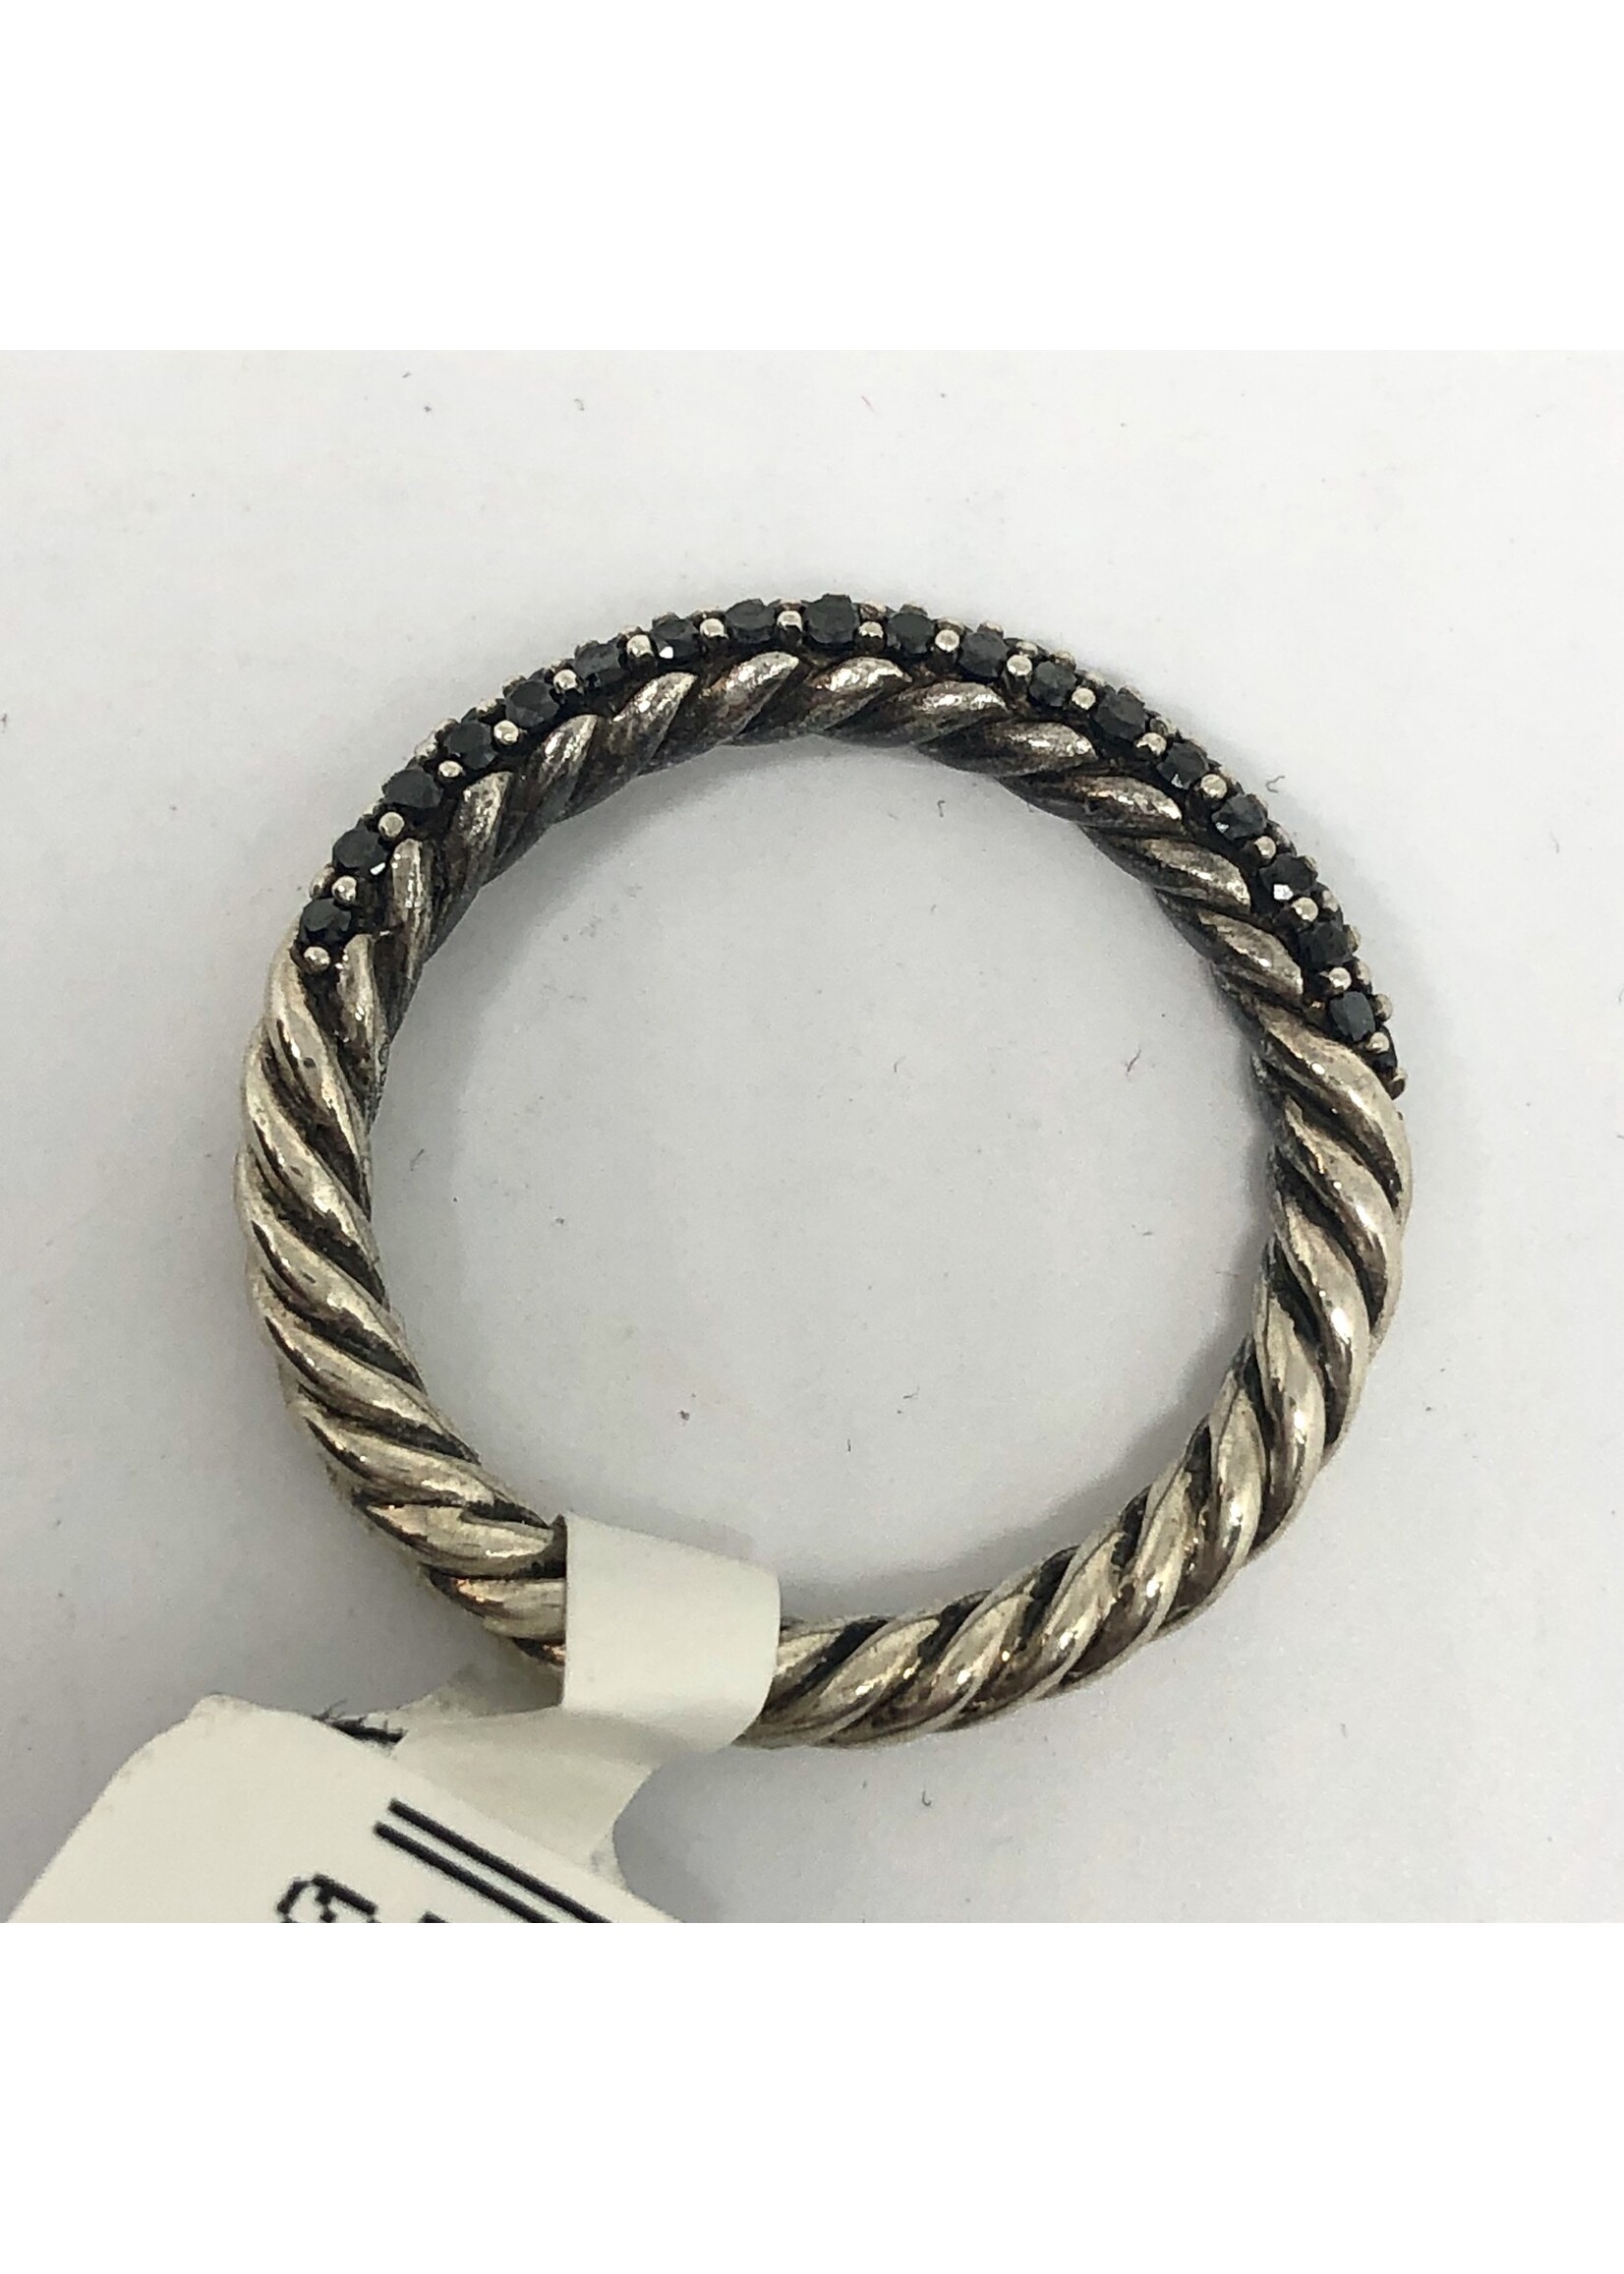 ADT-Sterl 3.1g D-.40tw Bl Dia Yurman Cable Band